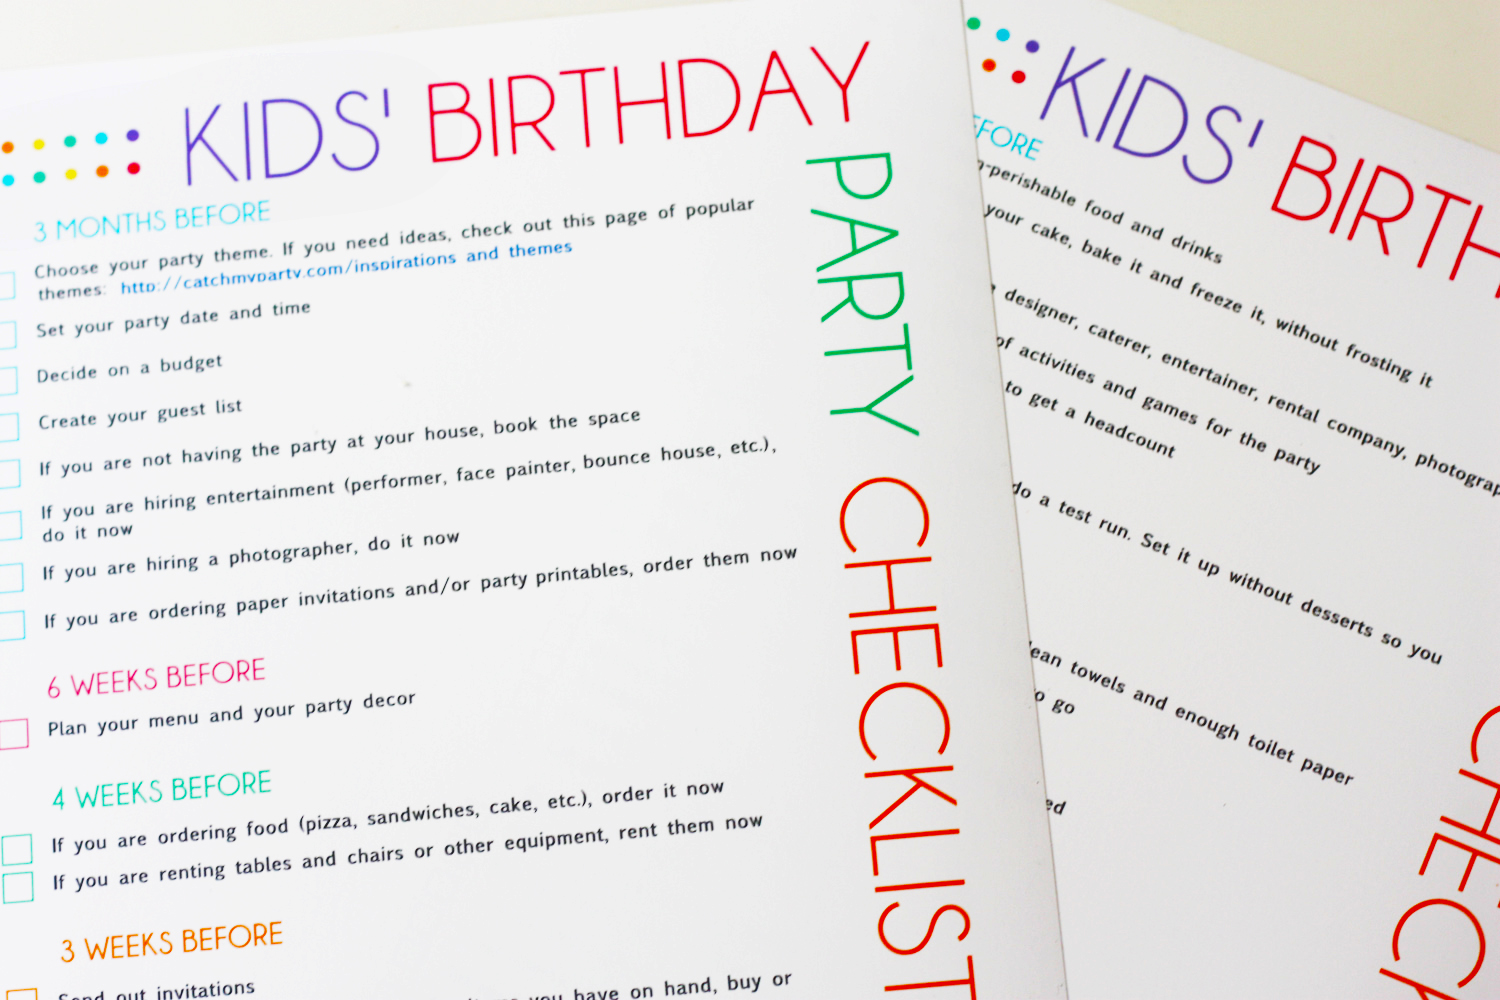 Here’s your Phillips Kids Party Planning Guide